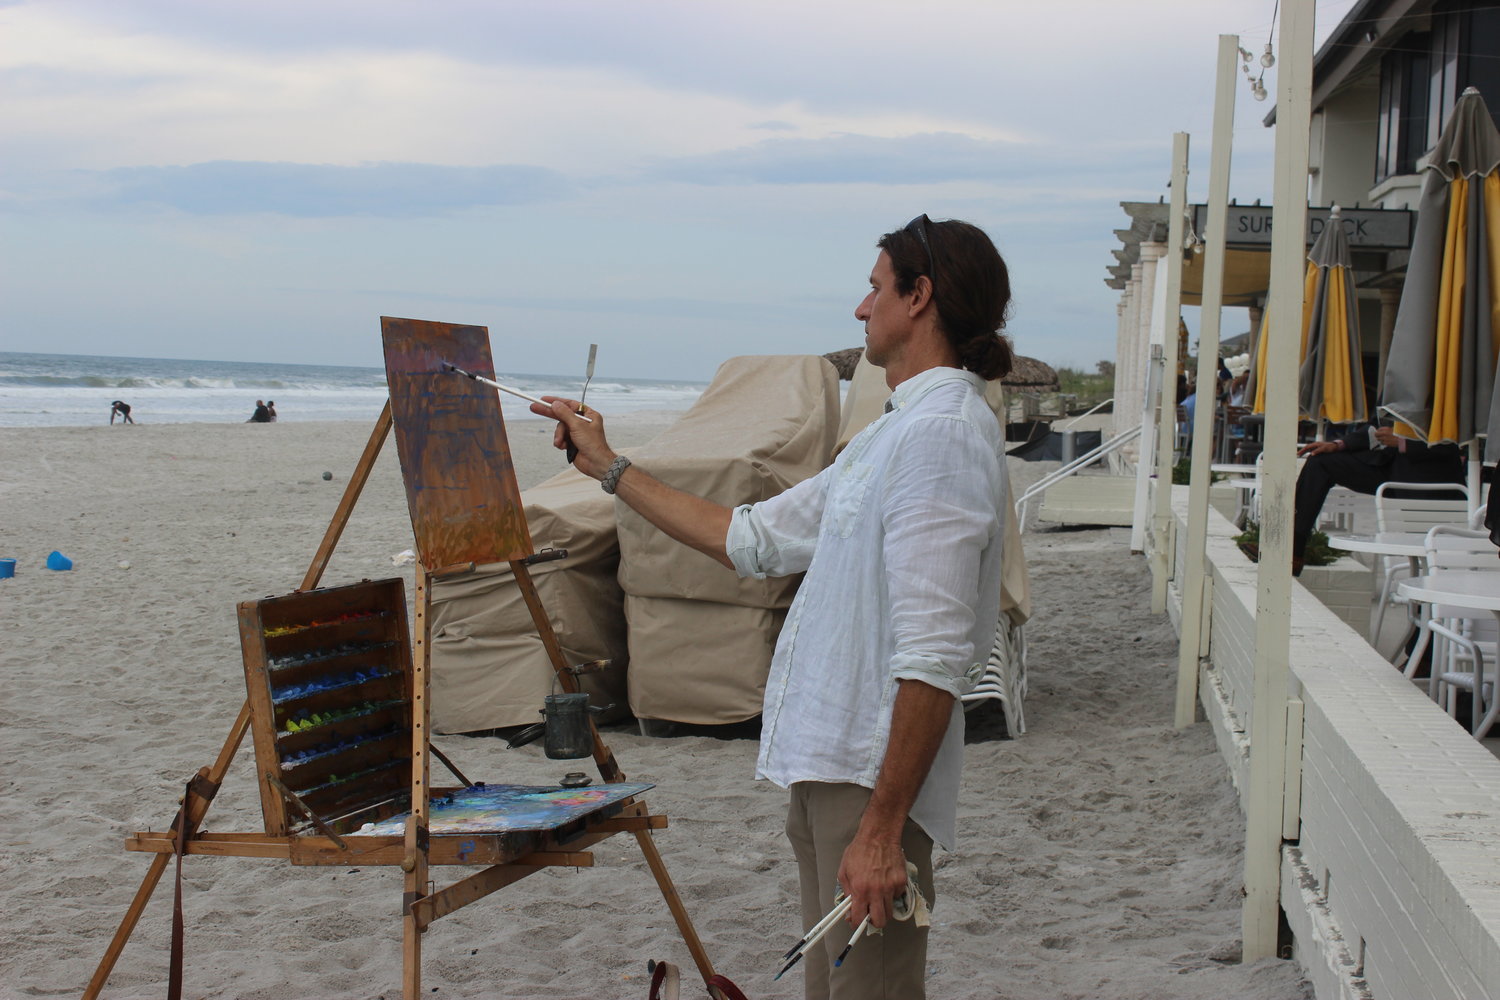 Artist Eugene Quinn gives a live painting demonstration on the beach outside The Surf Club at the Ponte Vedra Inn & Club during Beaches, A Celebration of the Arts on Sunday, May 15.